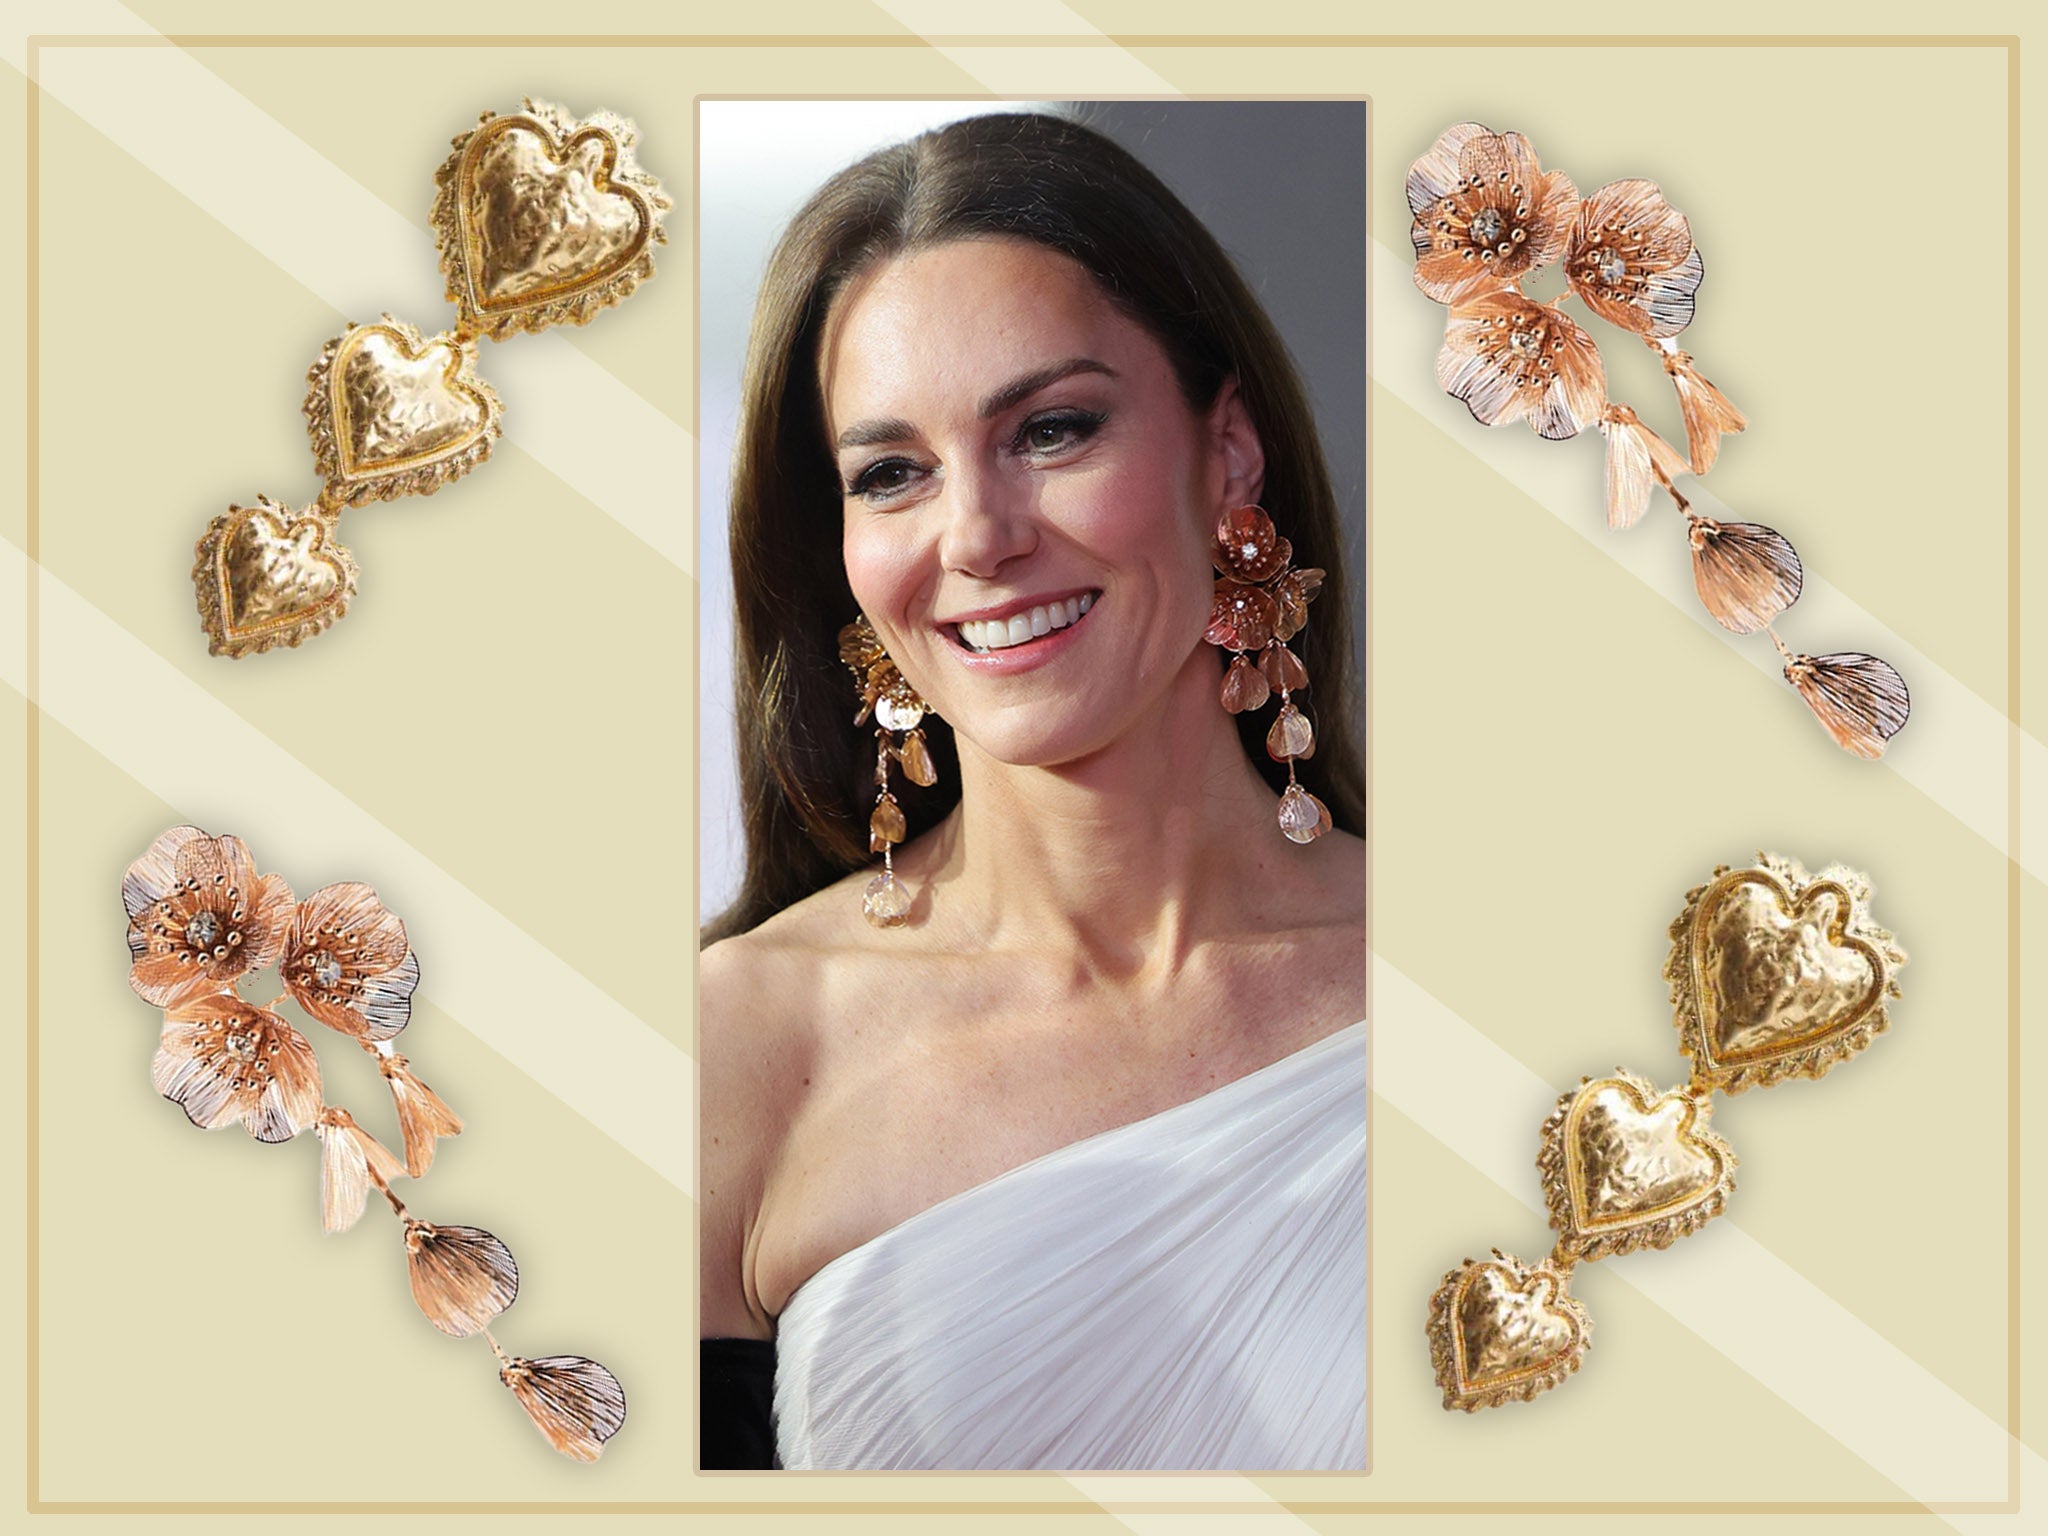 A pair of statement earrings can elevate even the plainest of outfits